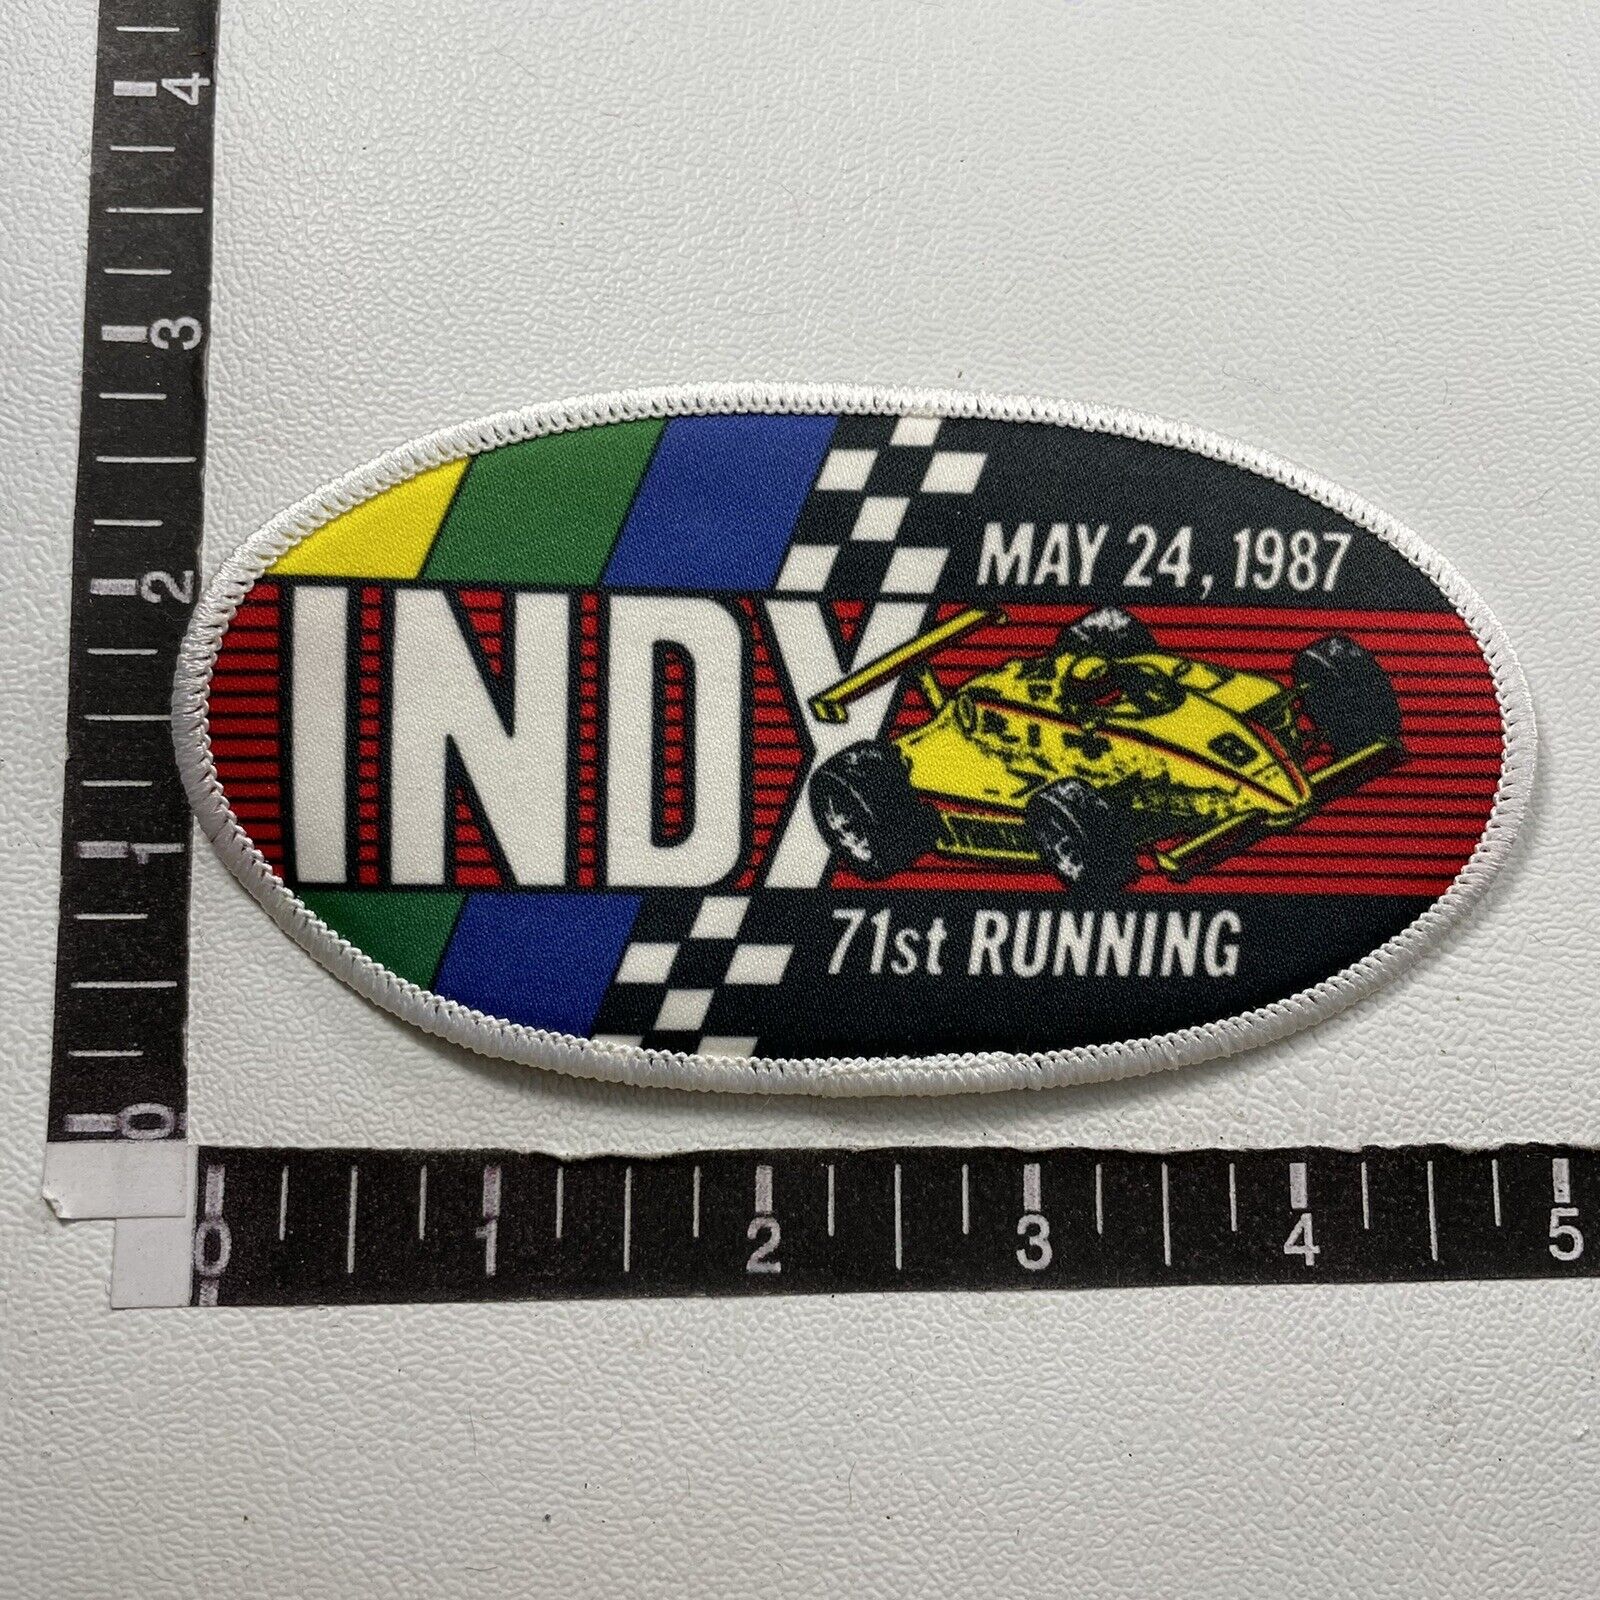 Vtg 1980s Car Racing 1987 INDIANAPOLIS 500 Patch Auto Race Indy Cars 00PG